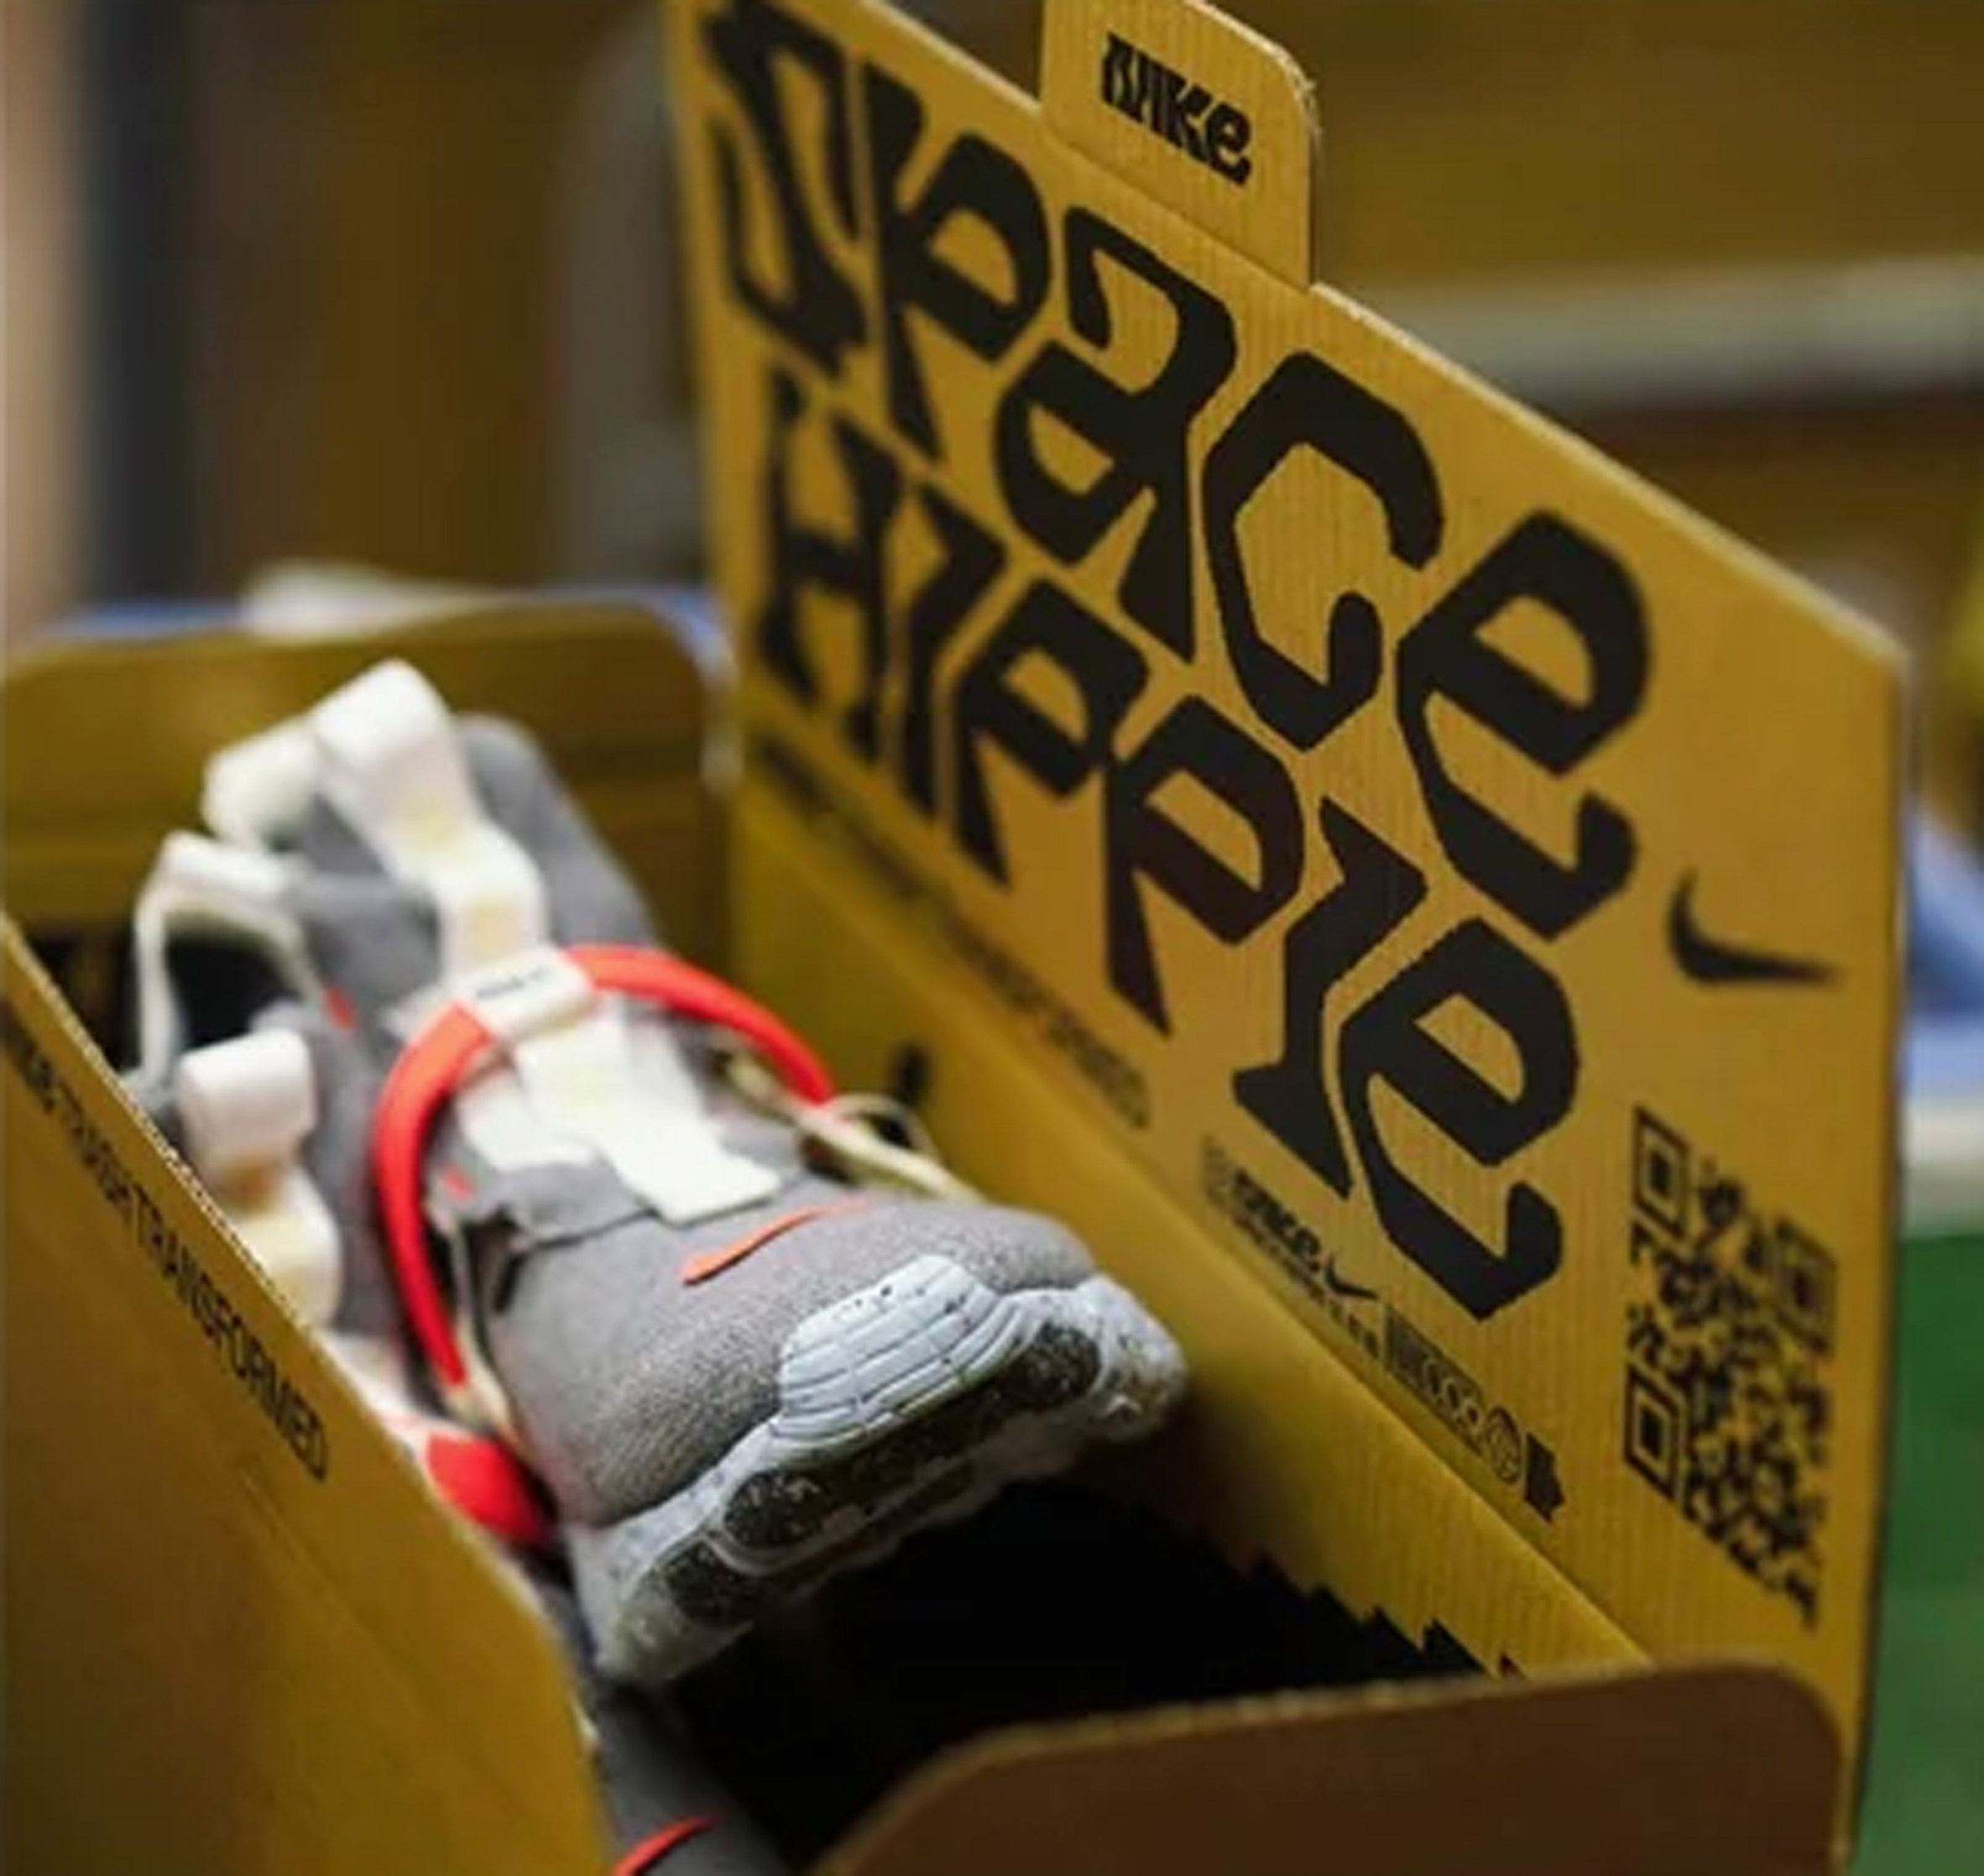 Operational is moves the says Nike's head of sustainability